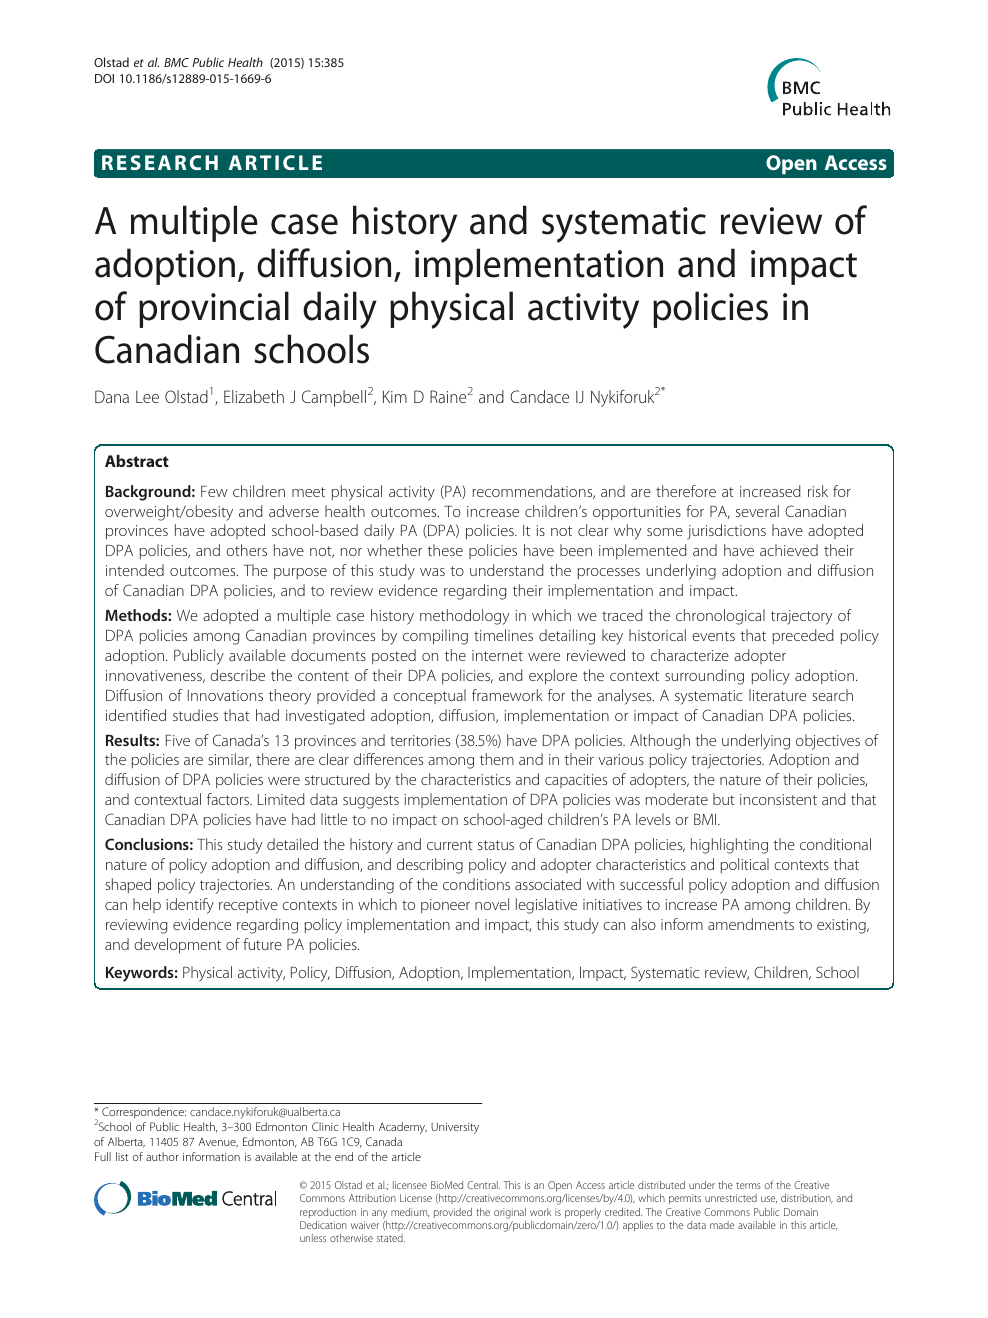 A multiple case history and systematic review of adoption, diffusion, implementation and impact of provincial daily physical activity policies in Canadian schools Porn Pic Hd